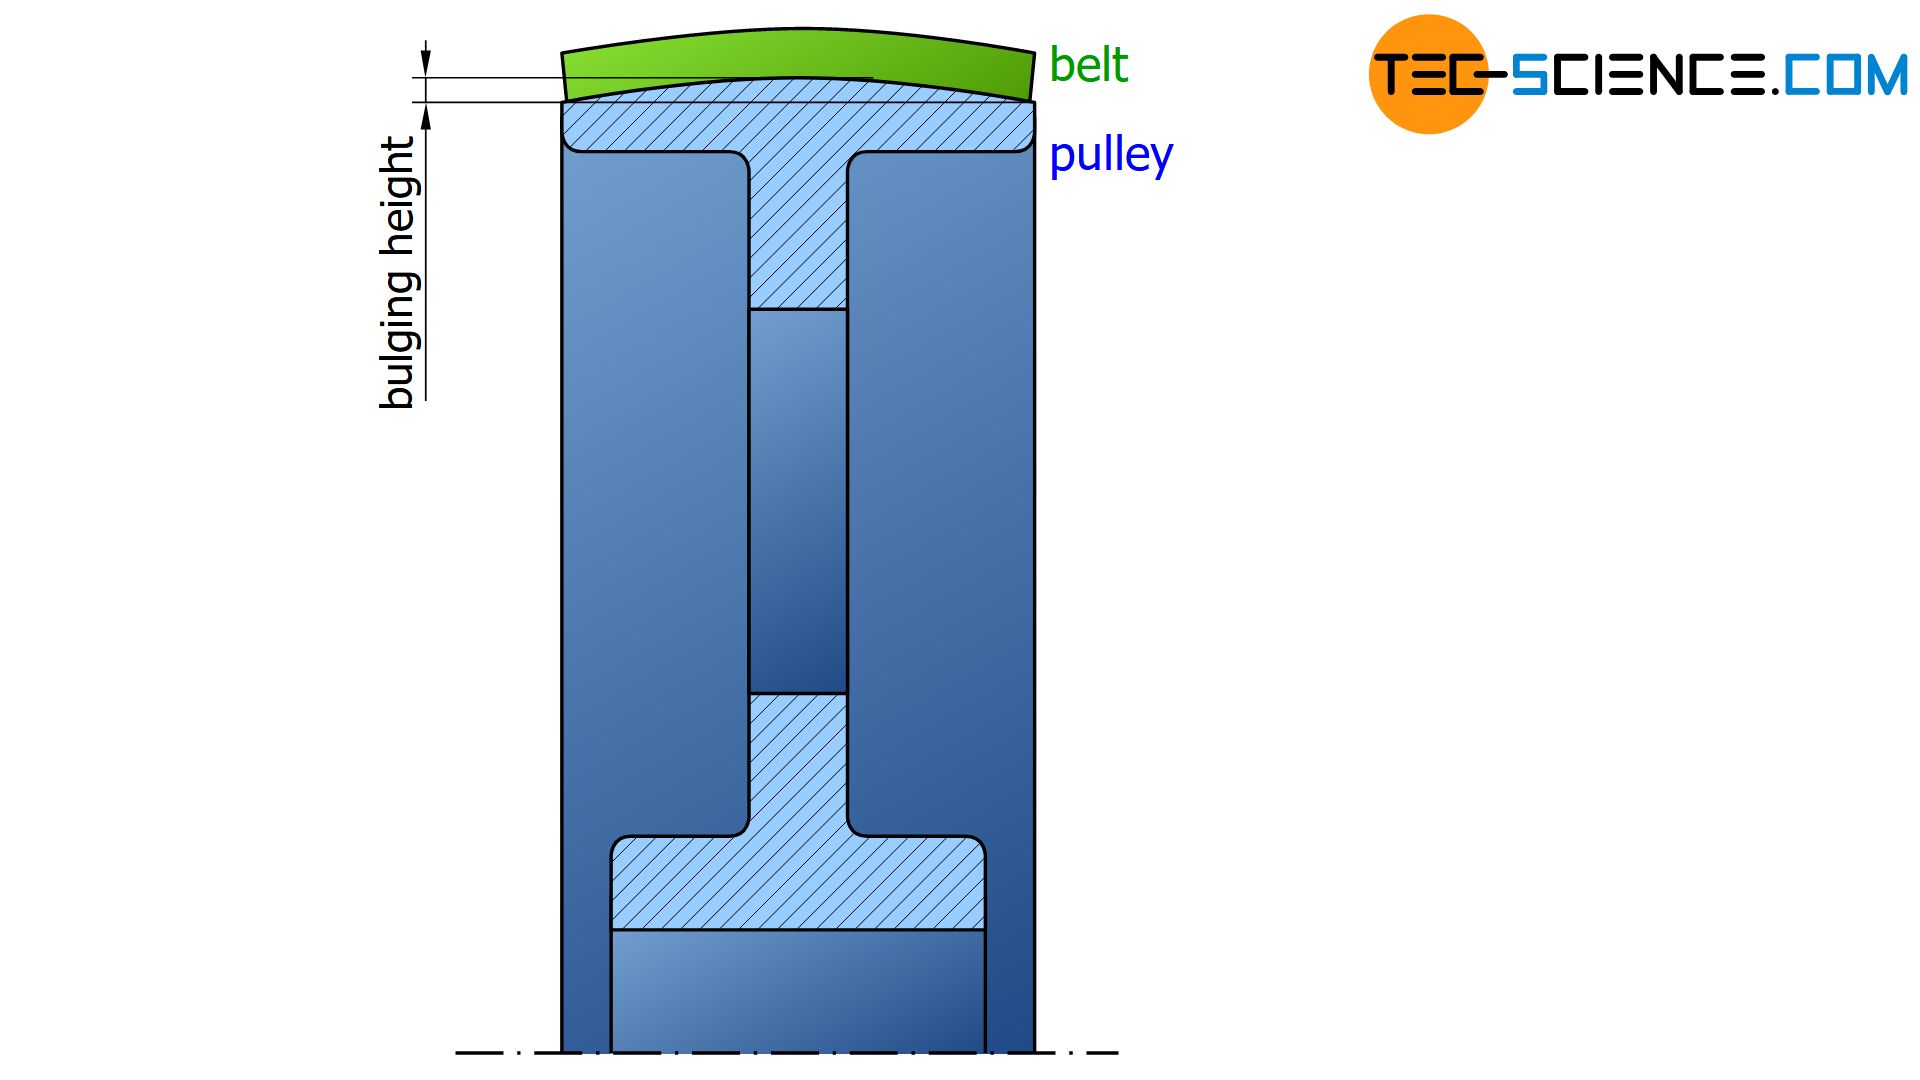 Image of a bulged pulley for flat belts.